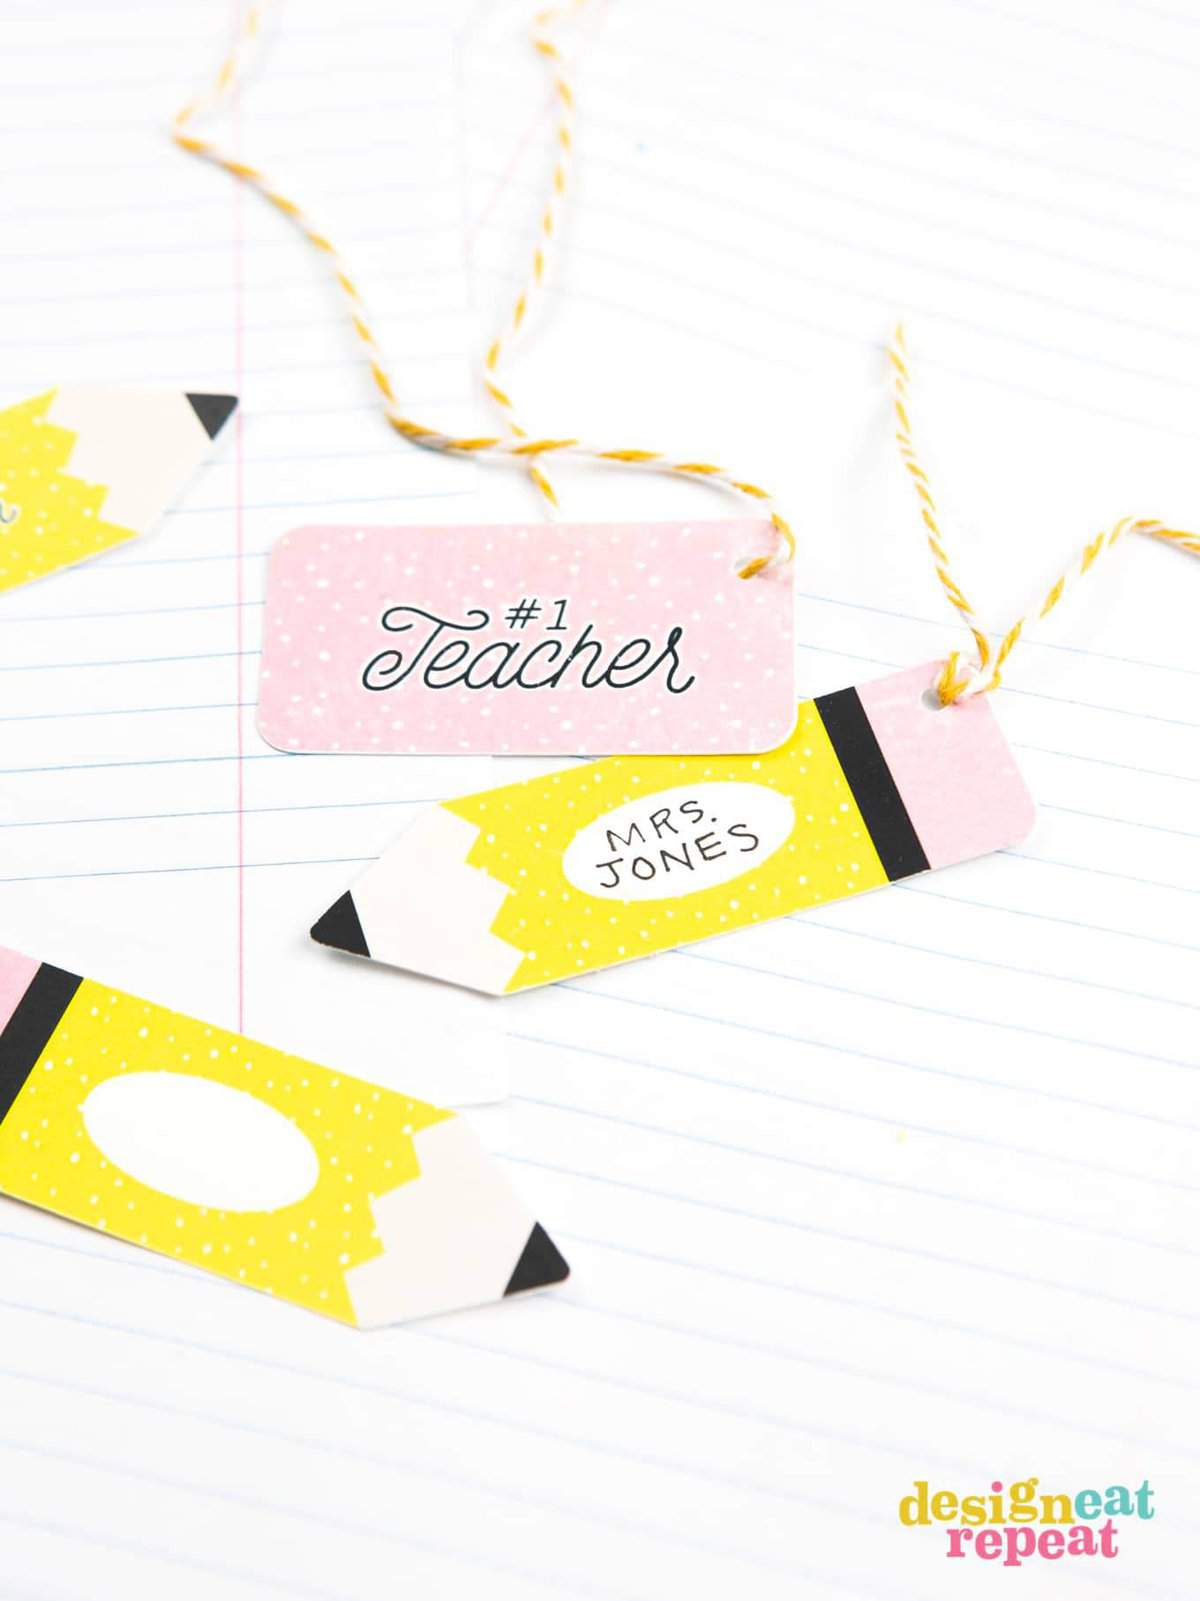 Whether you're putting together last-minute party favors, birthday gifts, or teacher gifts - these free printable gift tags are here to help you whip up an adorable, personalized treat box or bag without even leaving your house!